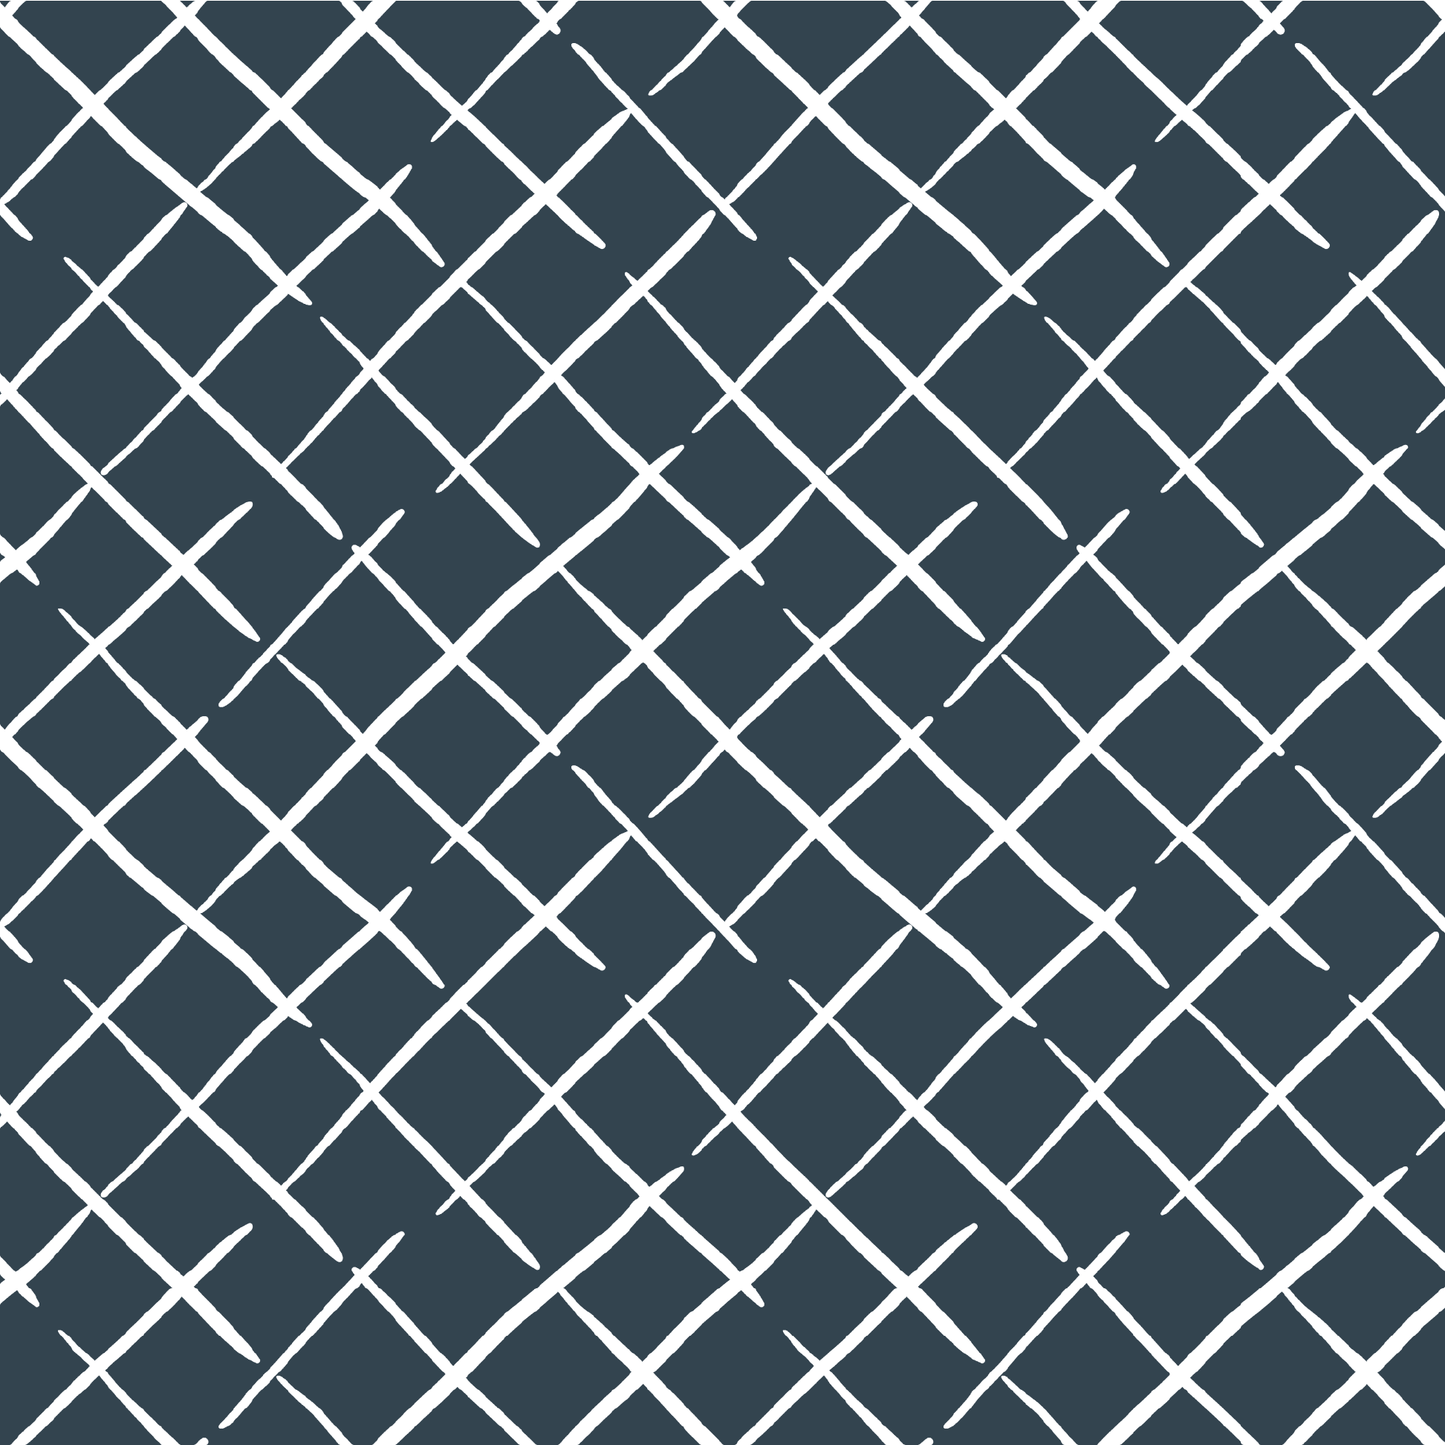 Bahama Court Navy Blue Outdoor Fabric by the Yard